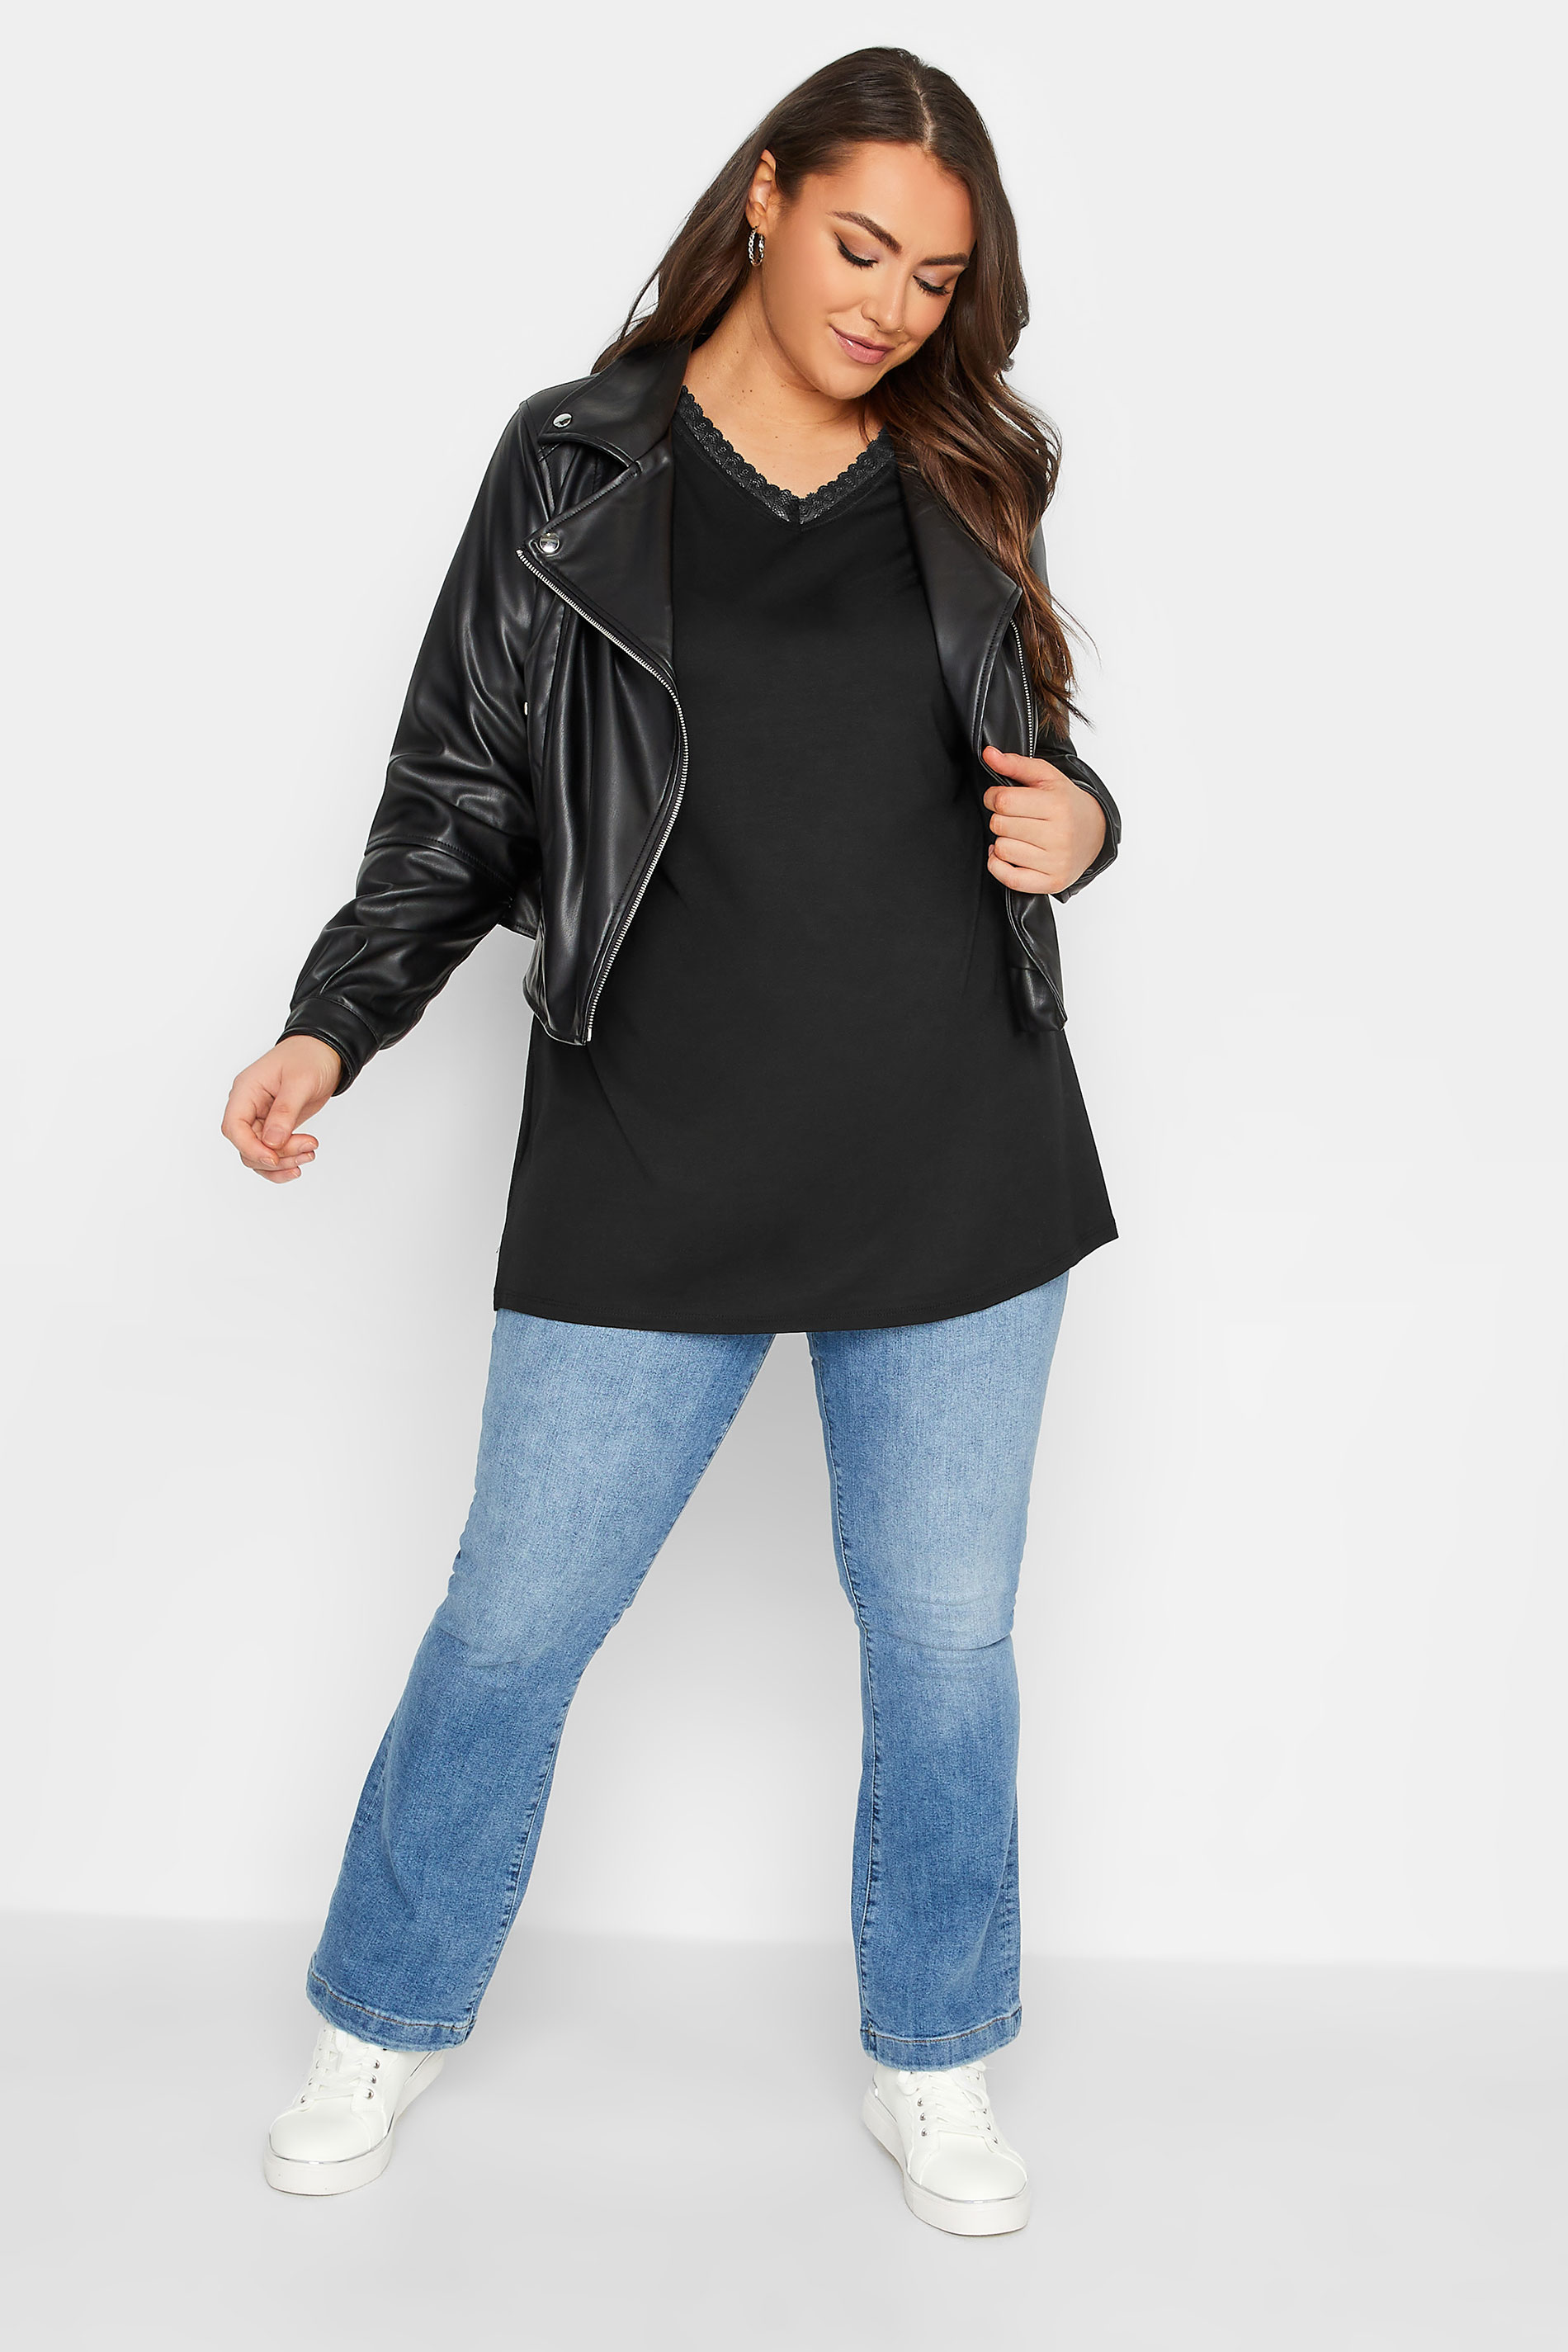 YOURS Plus Size Black Lace Neck T-Shirt | Yours Clothing 2